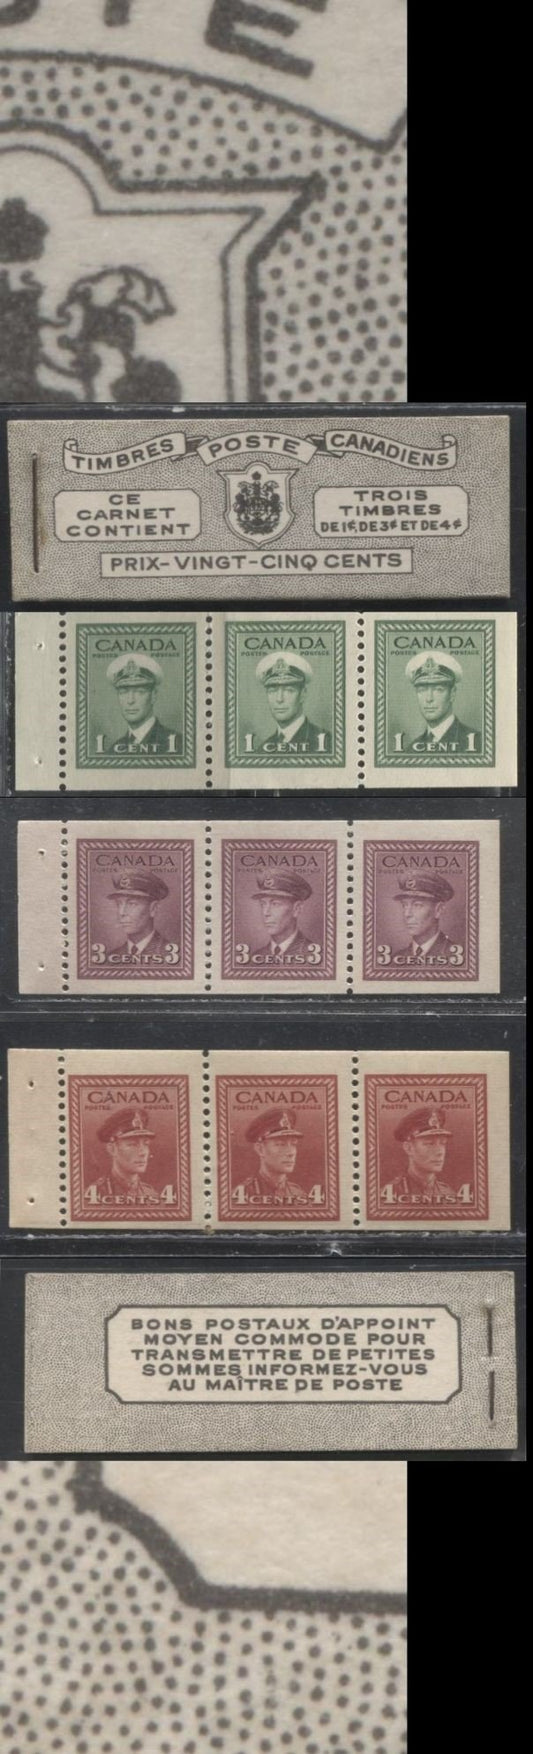 Lot 291 Canada #BK38a 1942-1949 War Issue Complete 25c, French Booklet Containing 1 Pane Each of 3 of 1c Green, 3c Rosy Plum and 4c Carmine Red, Harris Front Cover Type Va , Back Cover Jv, 7c & 6c Rate Page